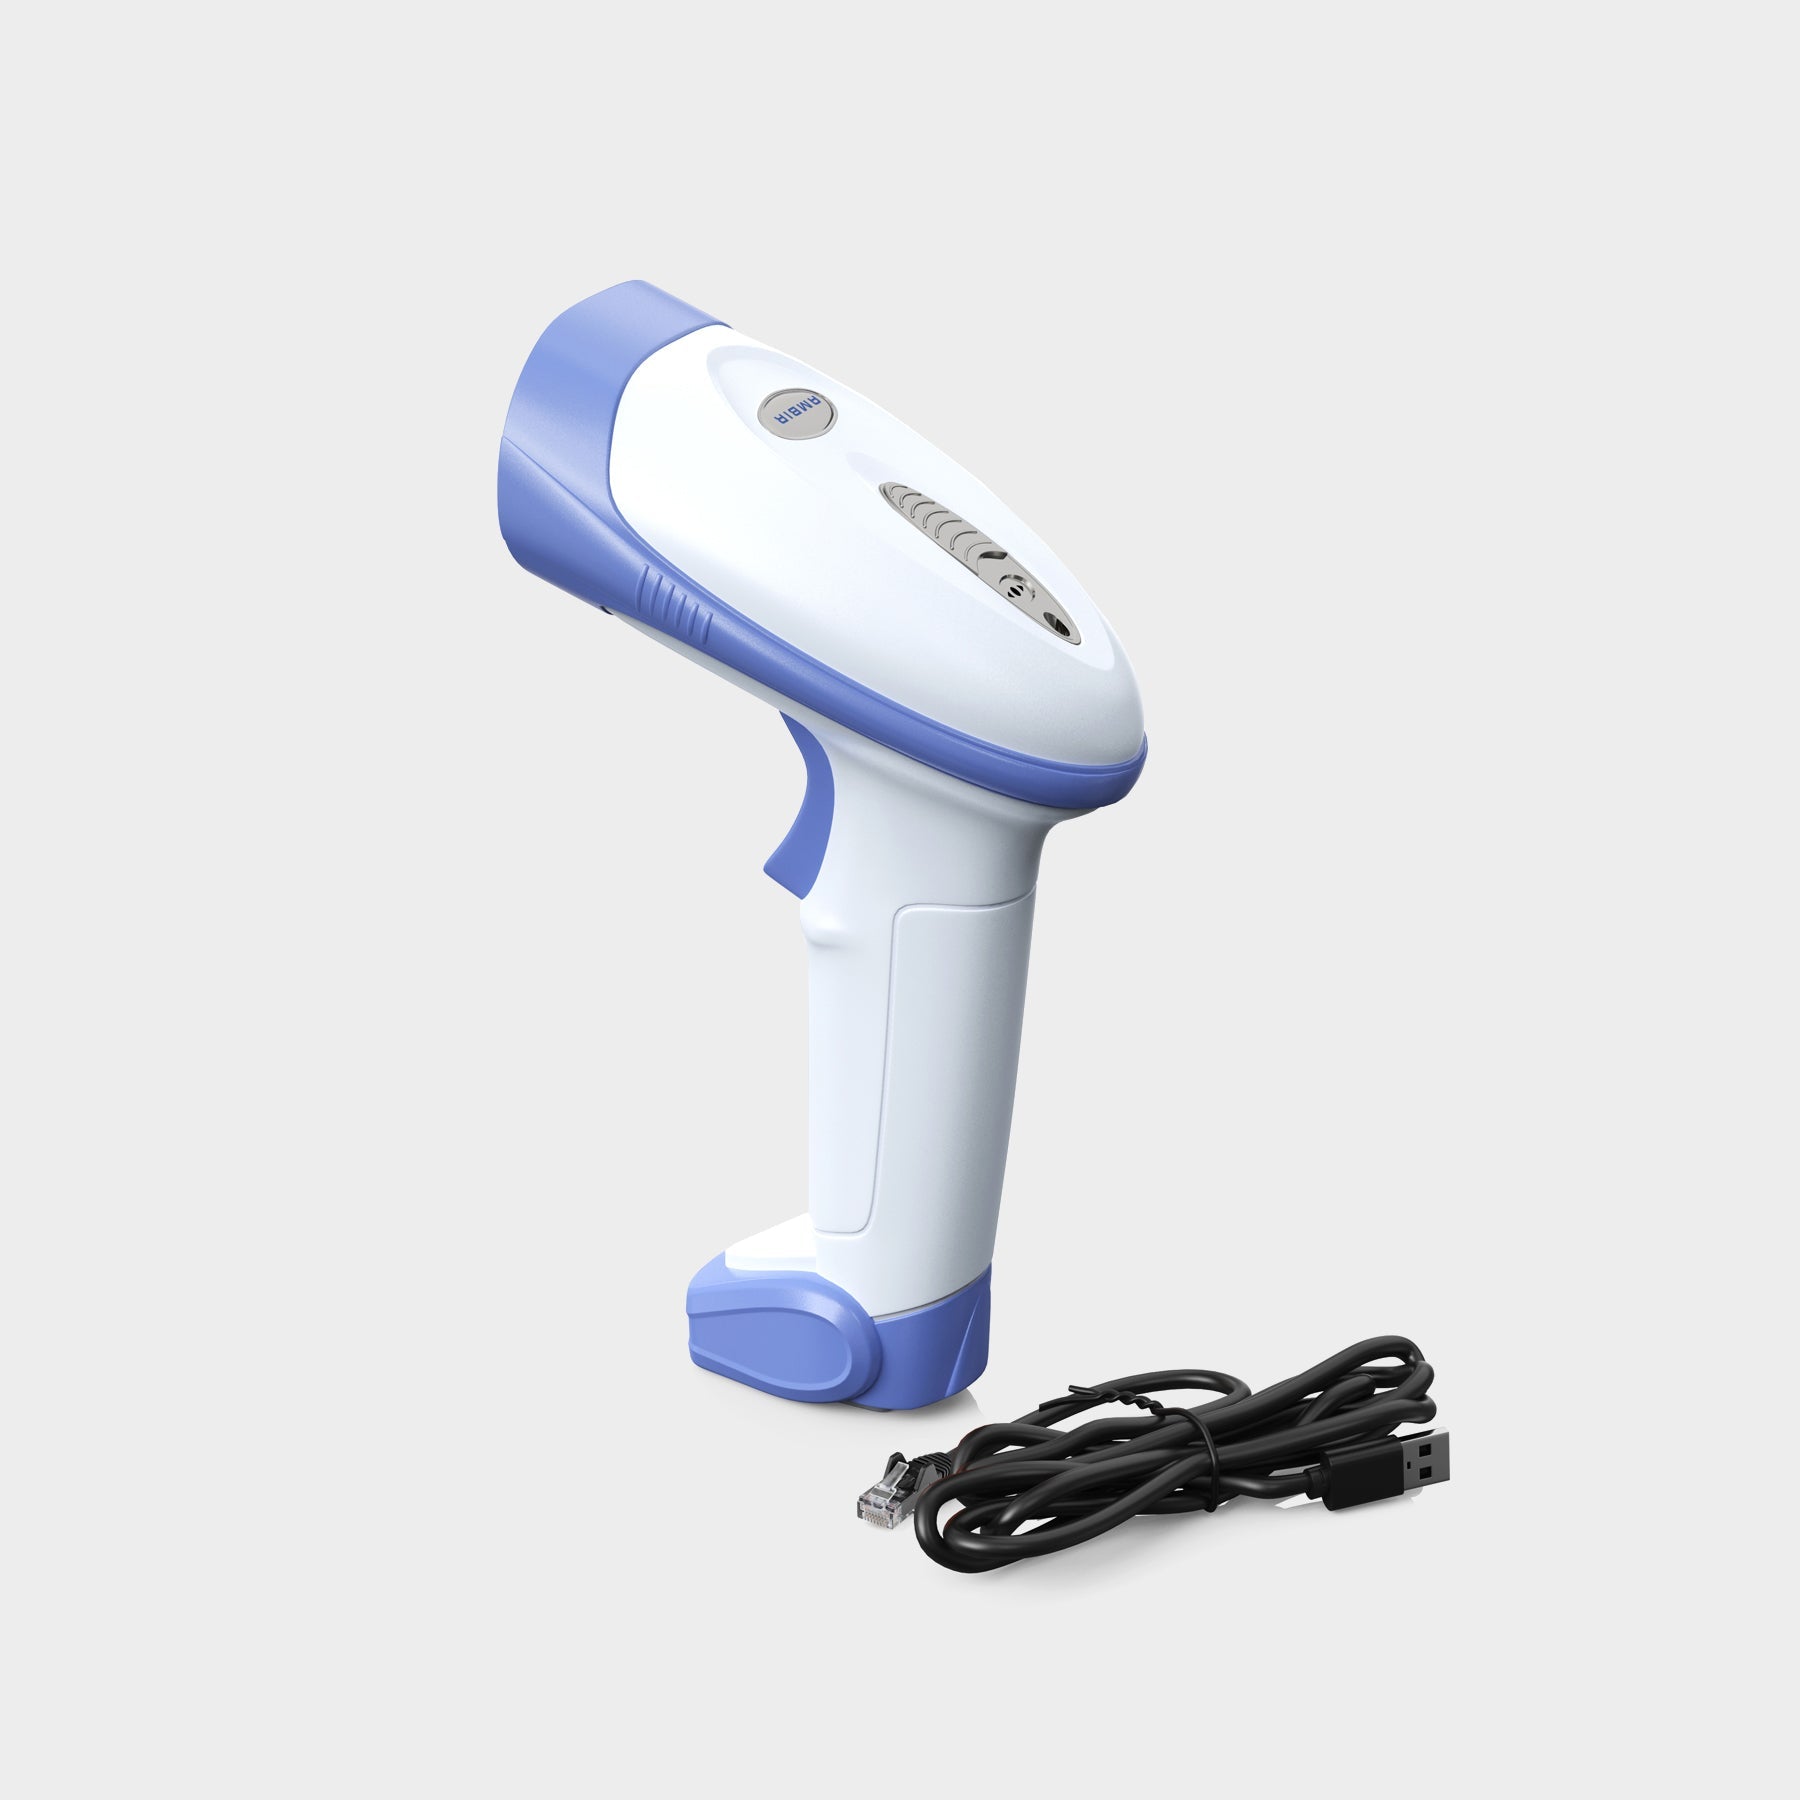 AMBIR BR100 USB Barcode Scanner - White/Blue (BR100-CWH) (Copy)